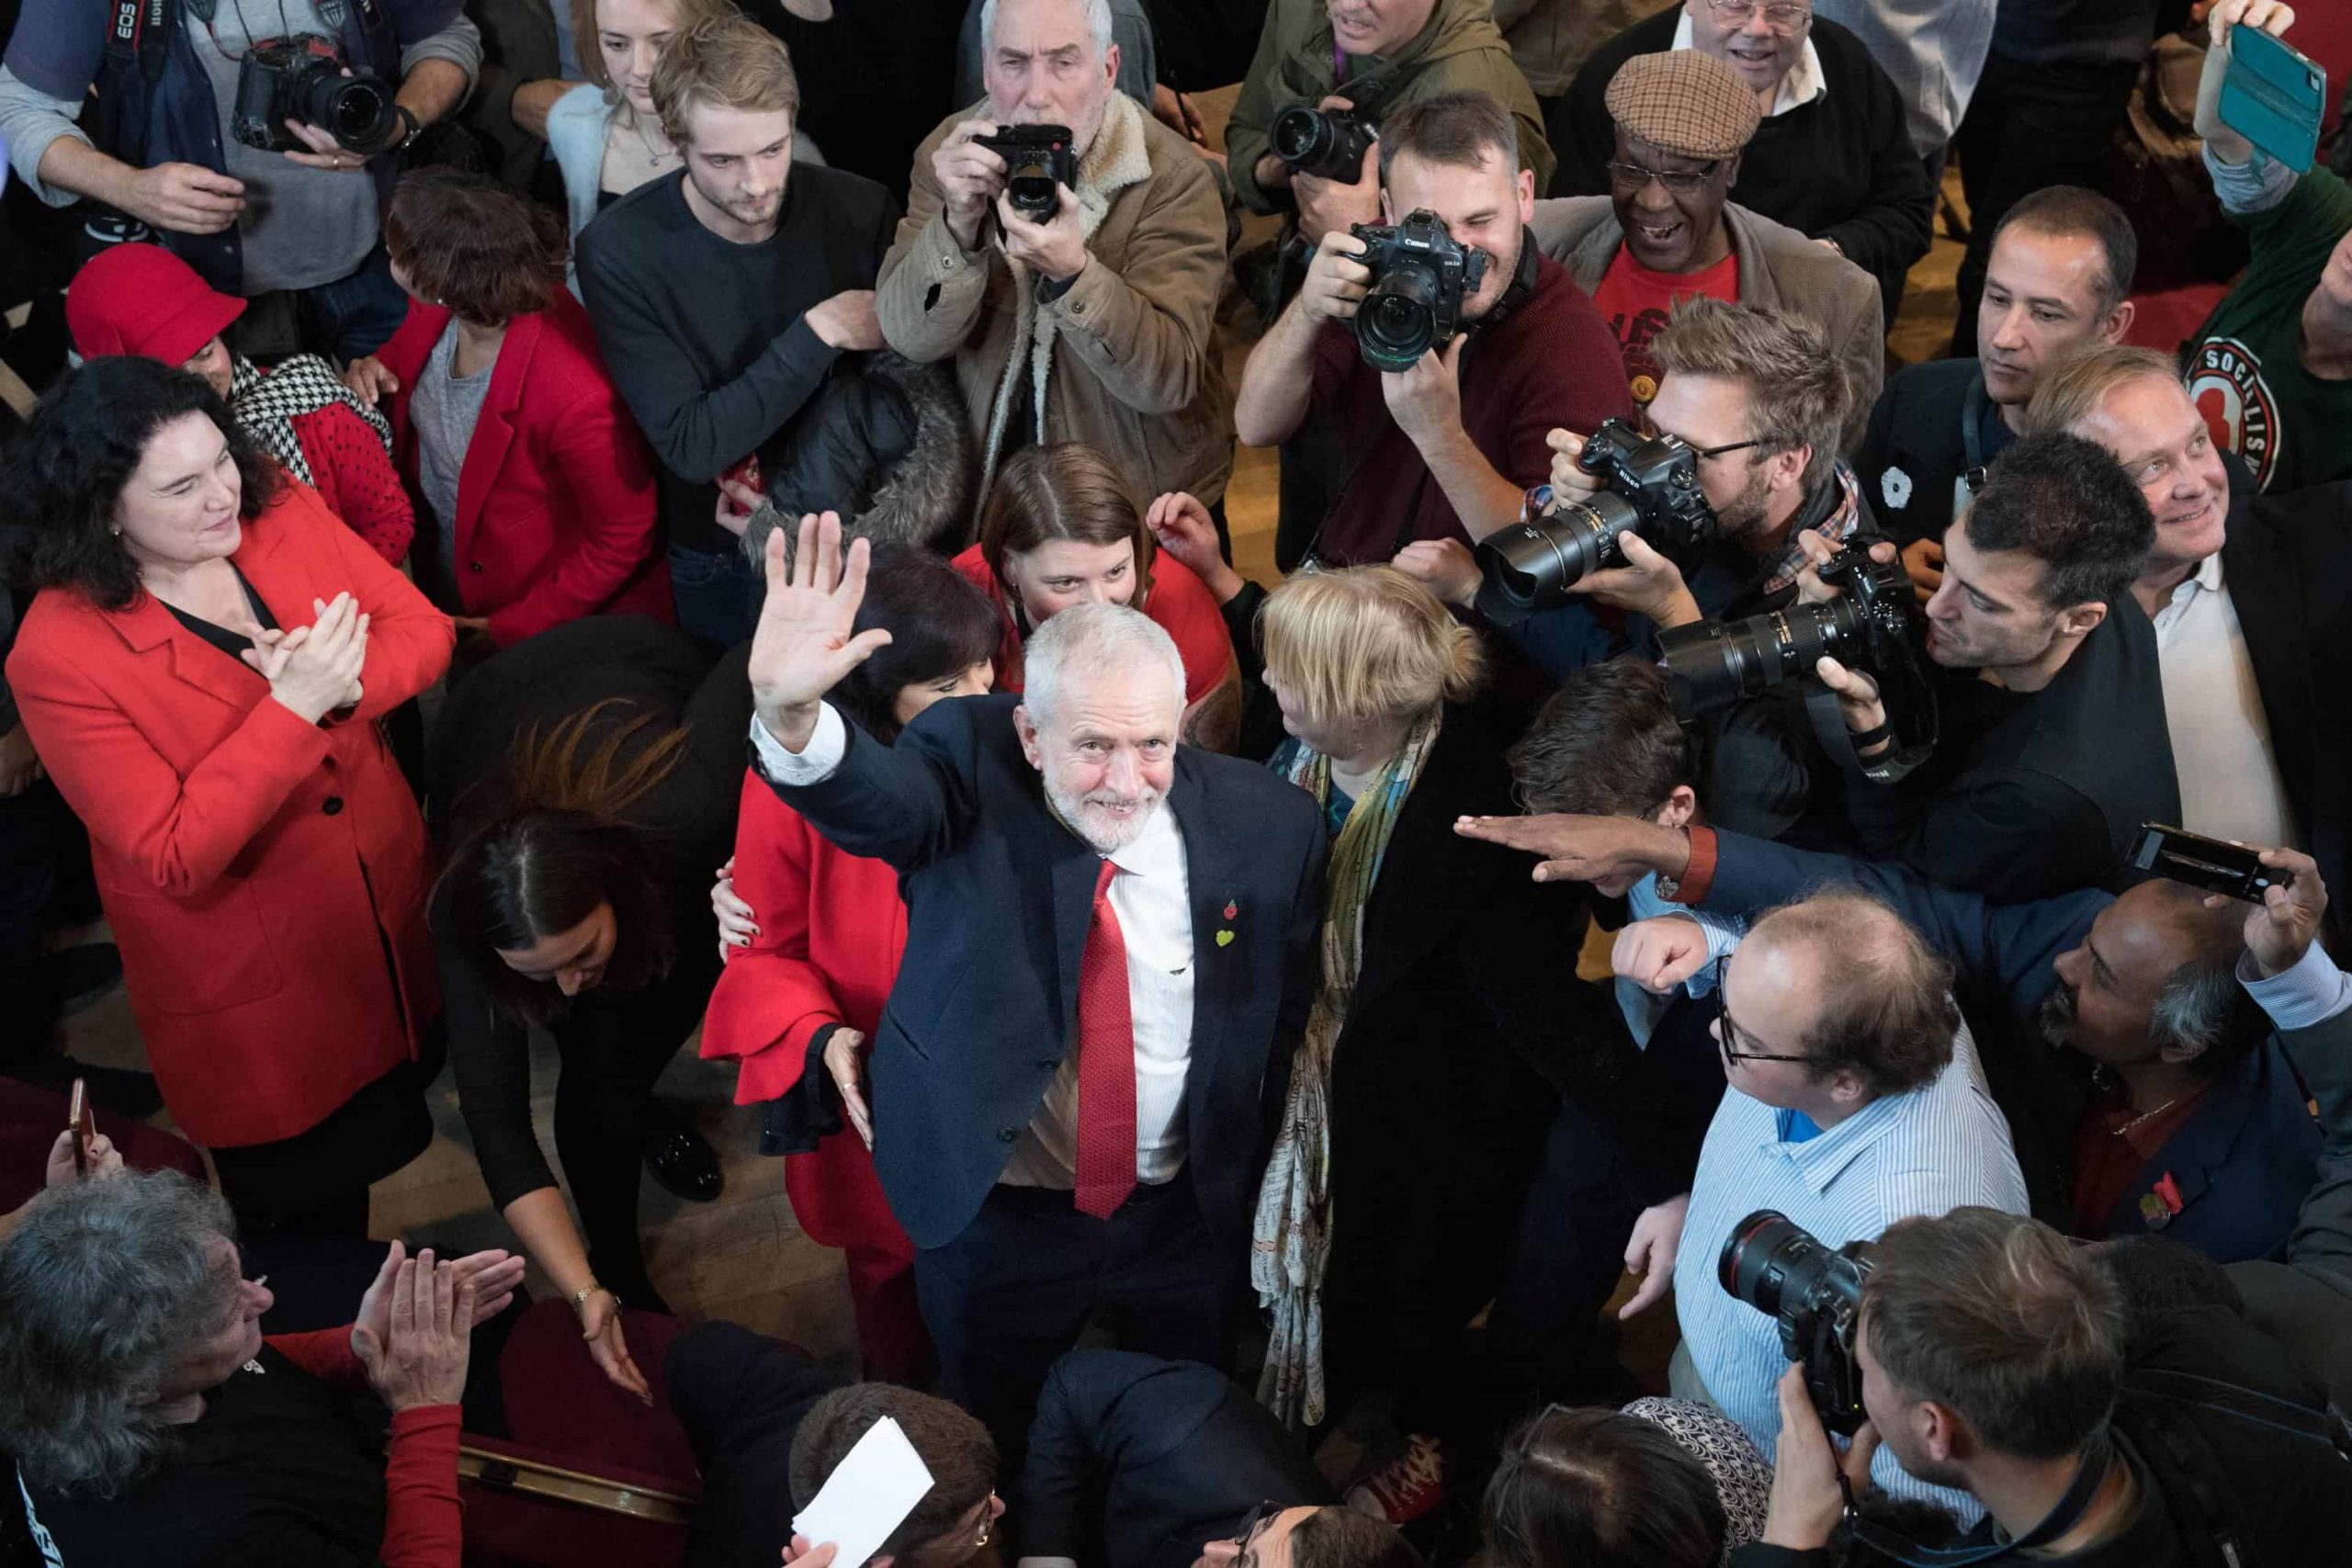 Labour unveil fully costed ‘manifesto of hope’ and warn about billionaire-owned media’s attacks